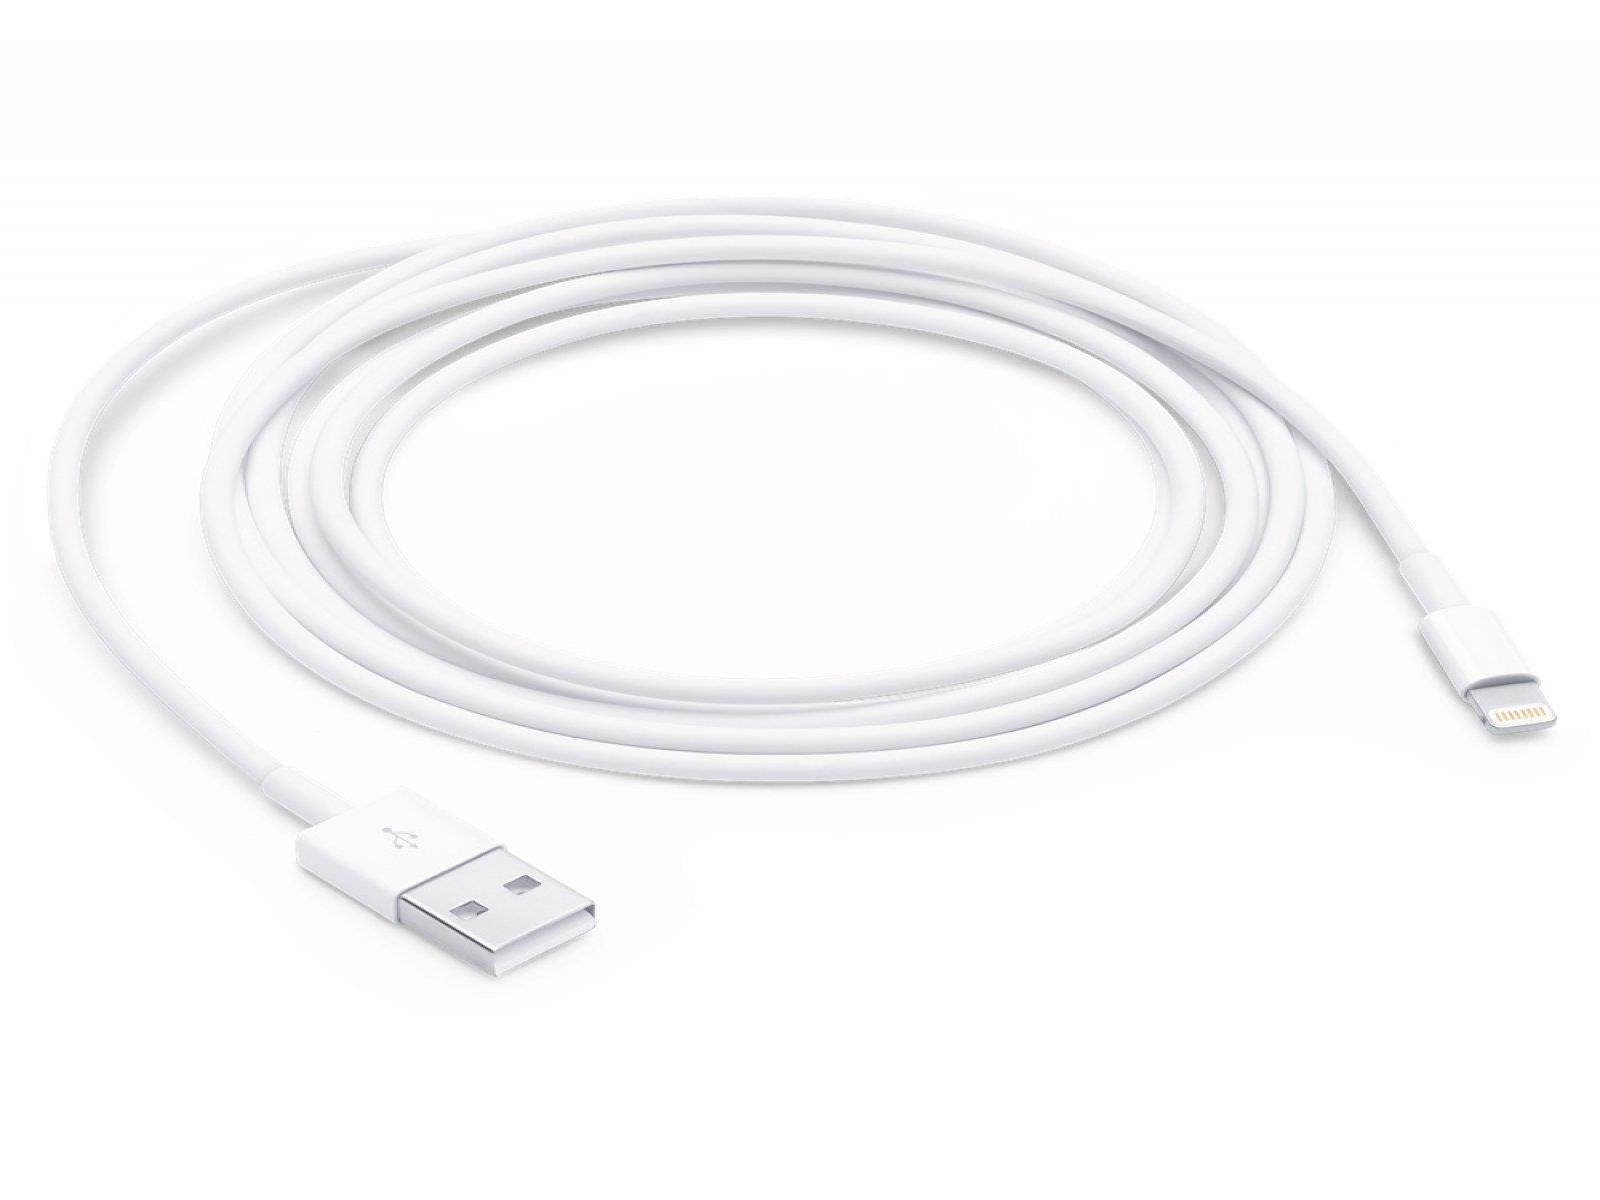 Apple Lightning to USB 2.0 Cable Showing Length of Cable 